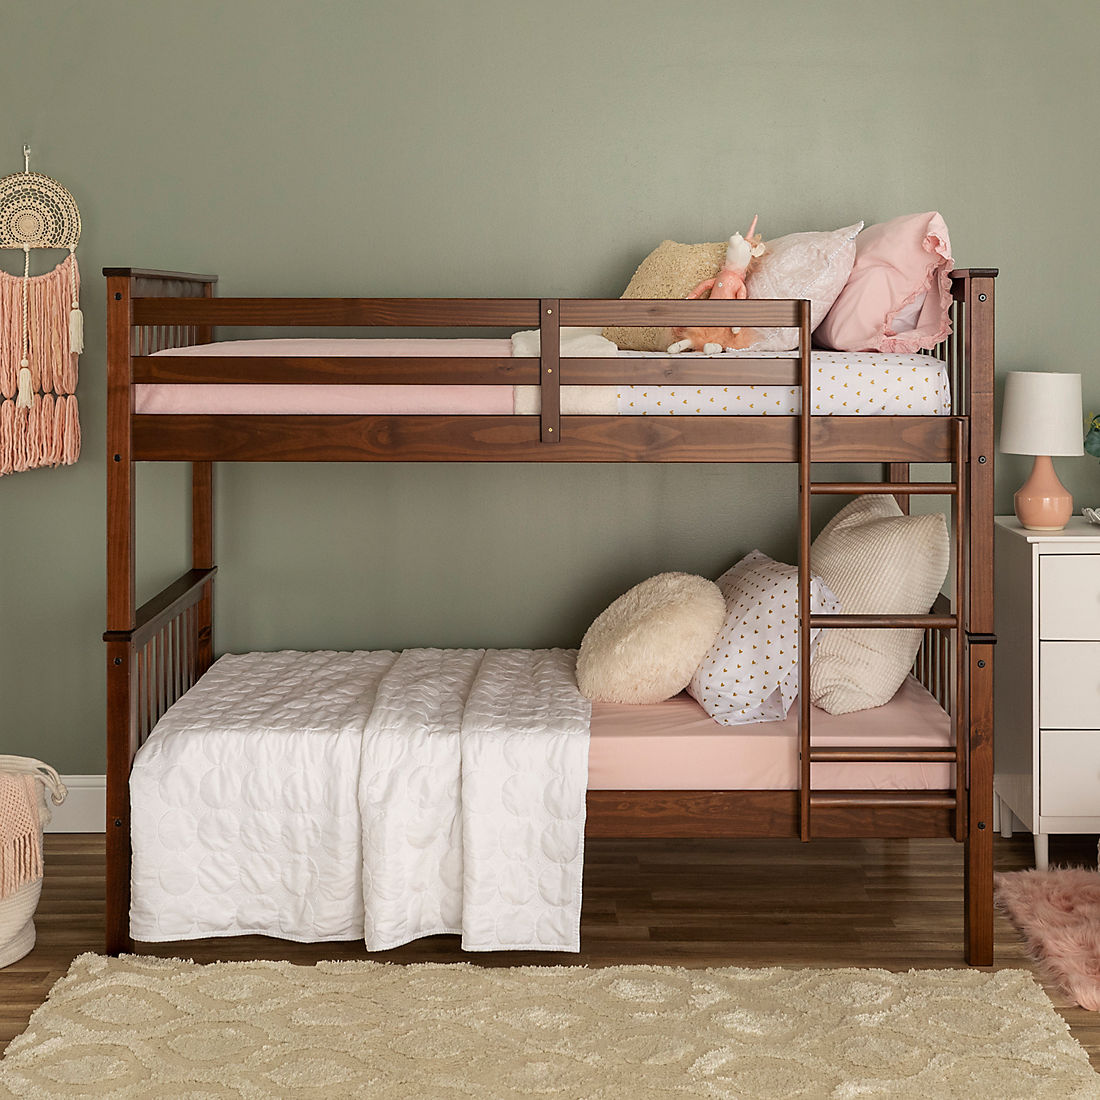 W Trends Twin Over Mission Style, Bjs Bunk Bed With Trundle